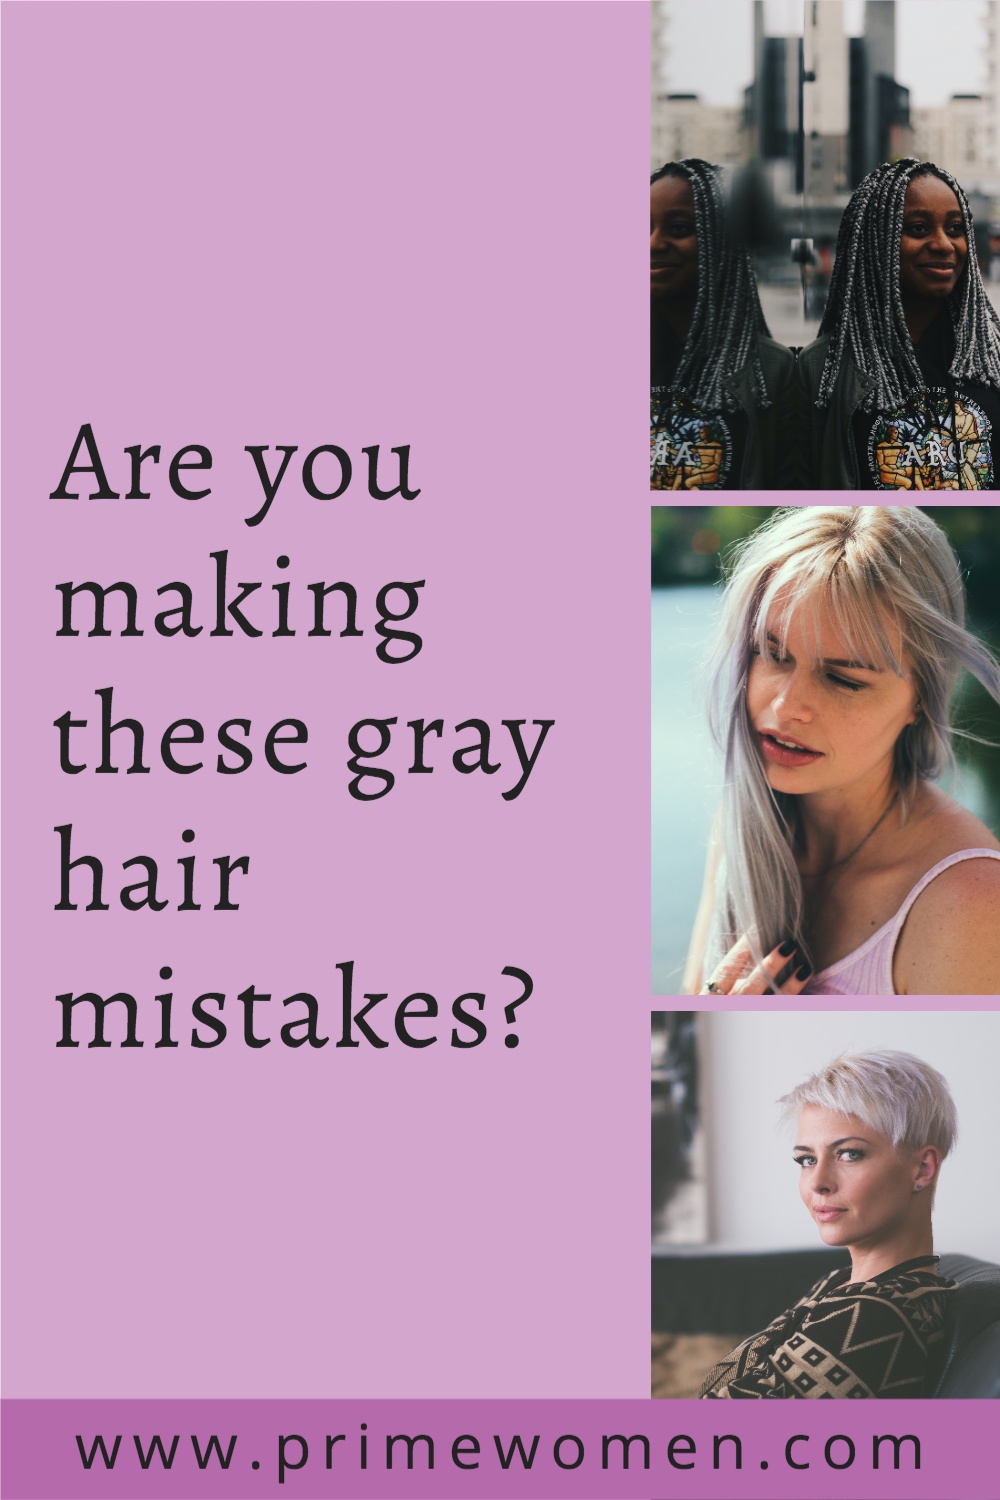 Are you making these gray hair mistakes?